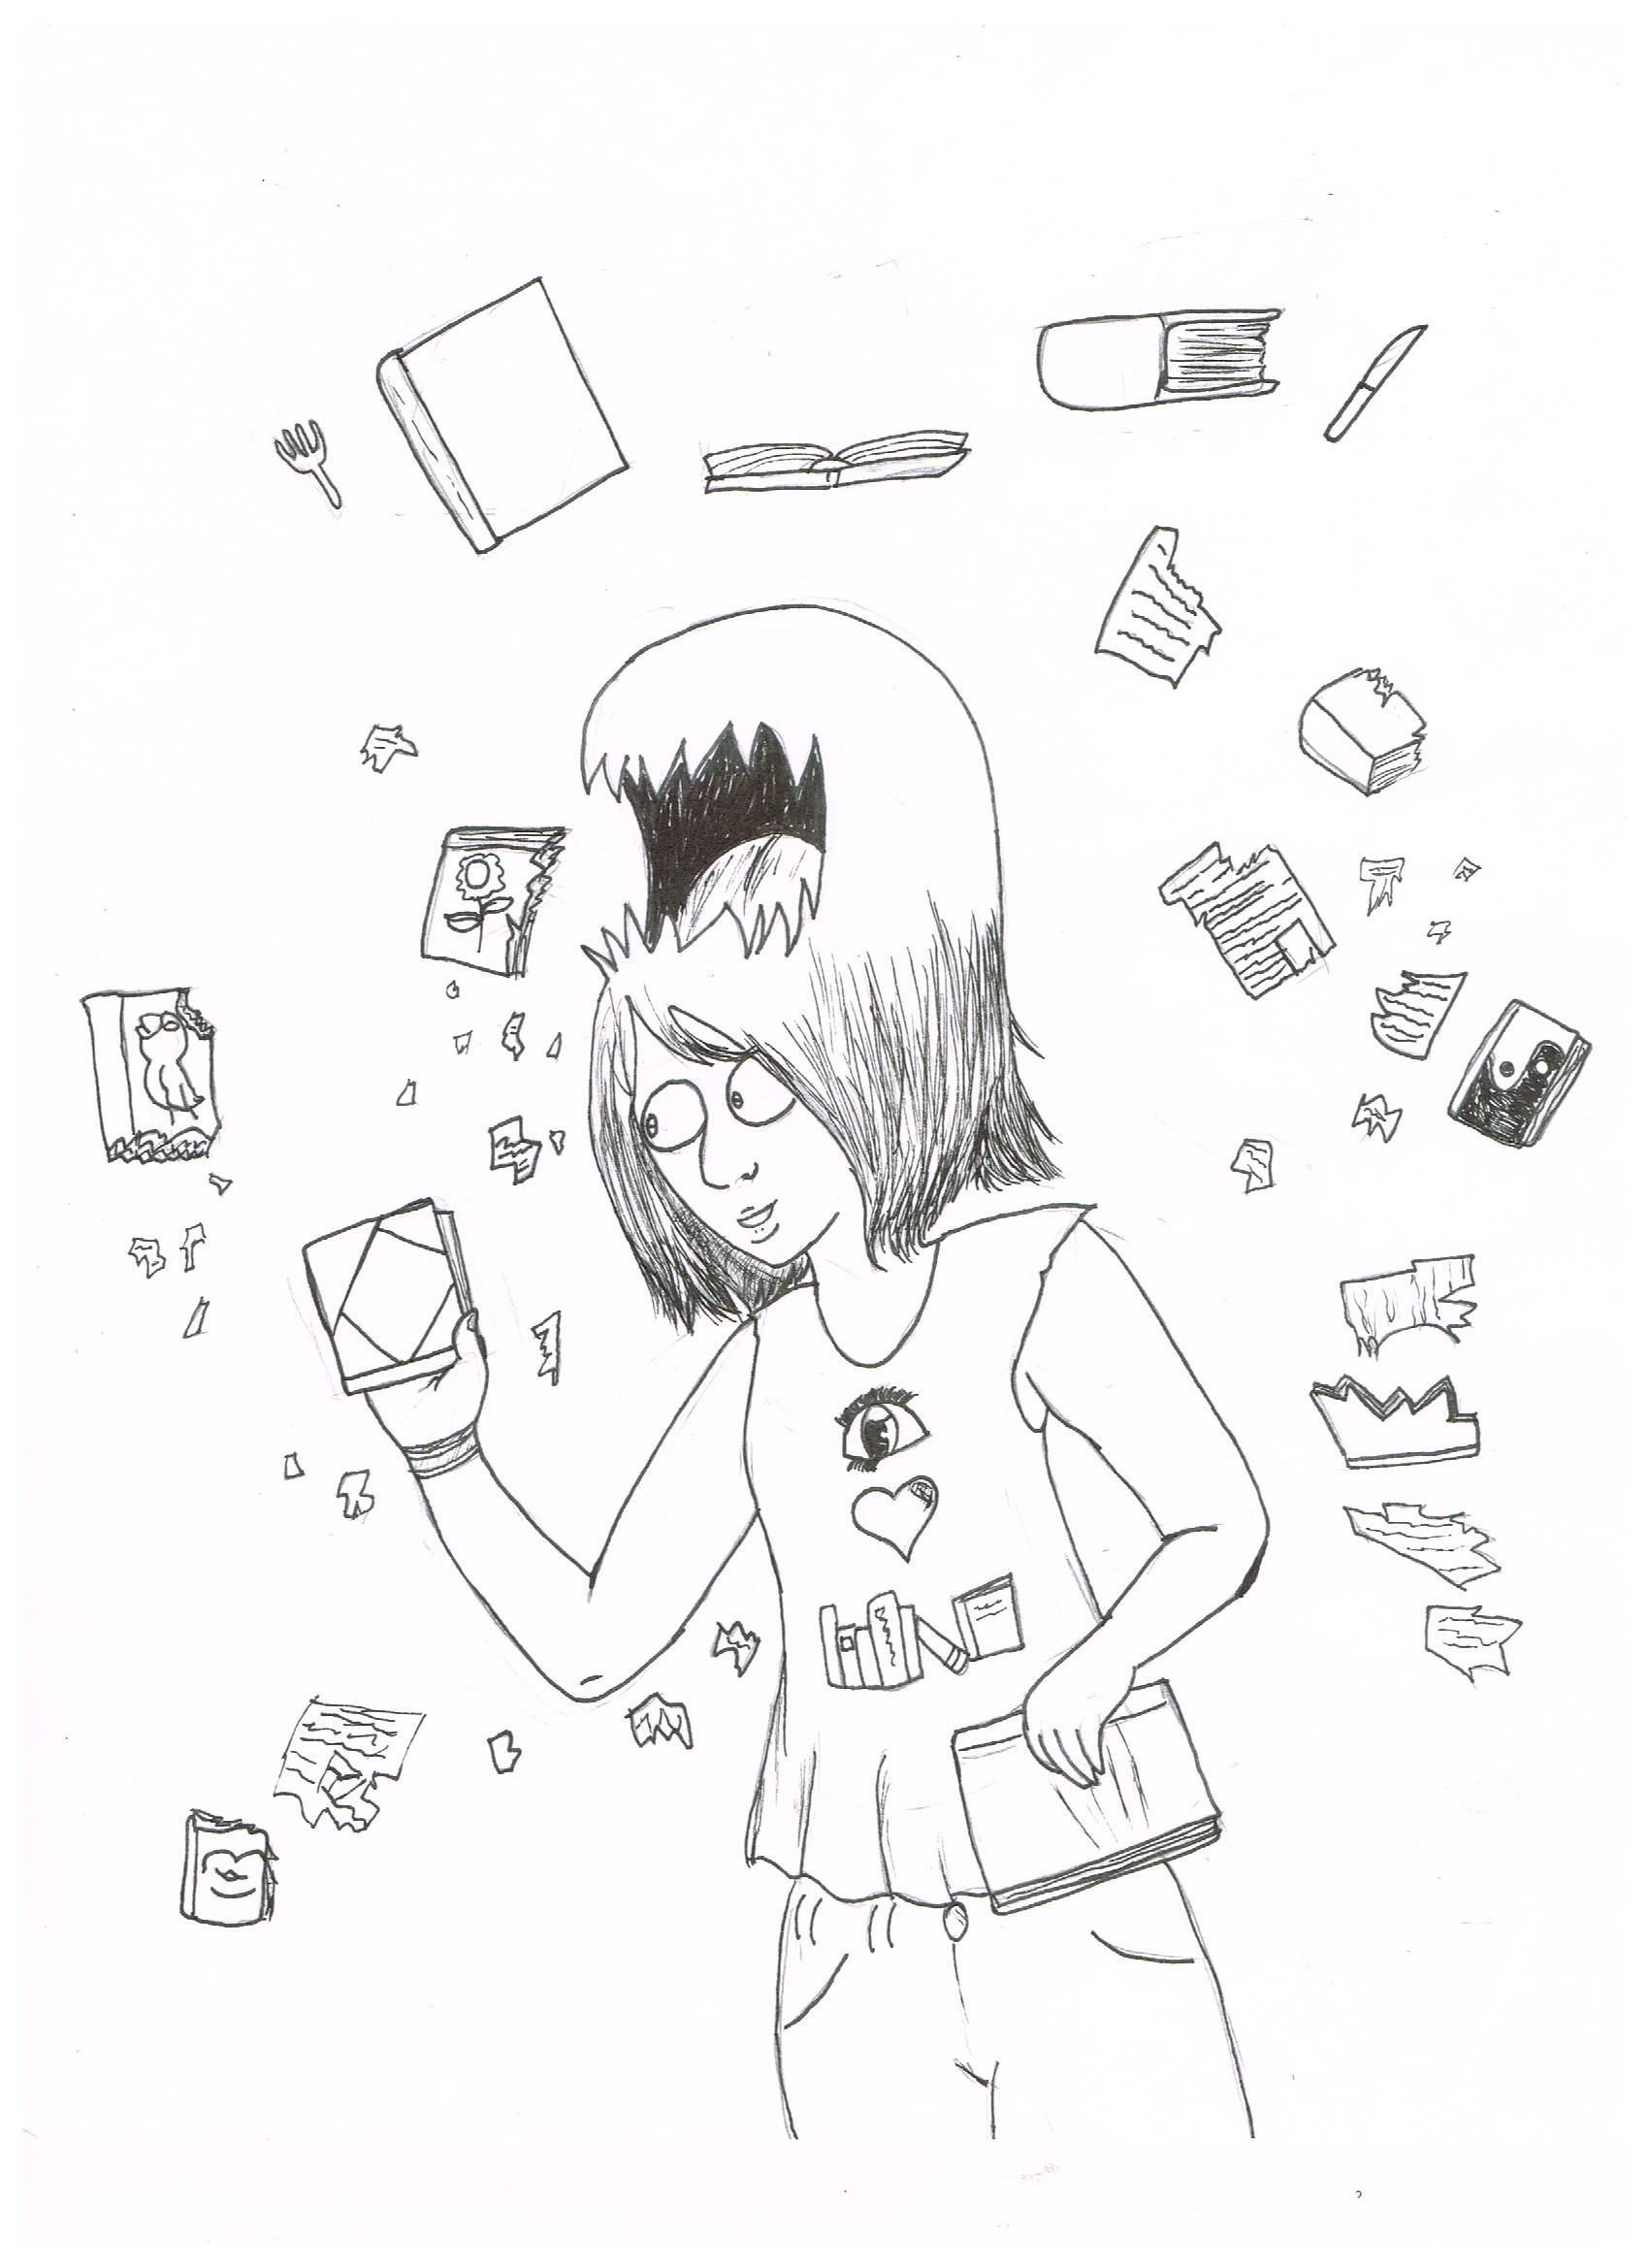 A drawing of a girl whose hair is raised forming a mouth surrounded by books missing bites and pieces of pages.